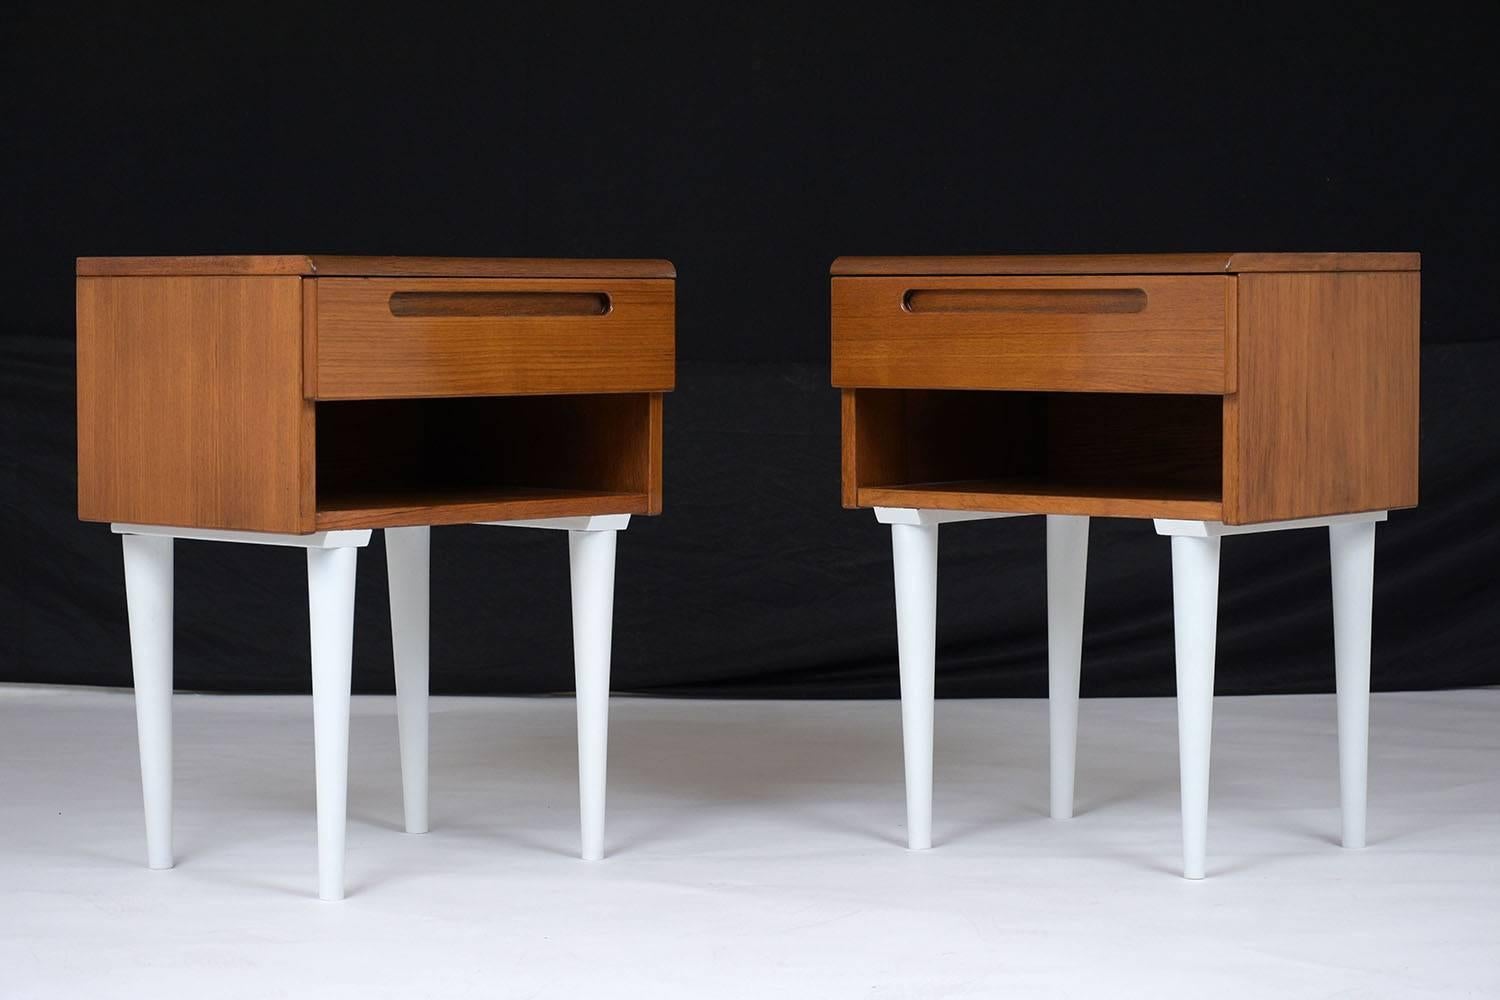 This pair of 1970s Danish Mid-Century Modern-style teak wood nightstands feature a walnut and white color combination with a lacquered finish. The body of the nightstands have a single drawer with handles carved into the drawer front and an open